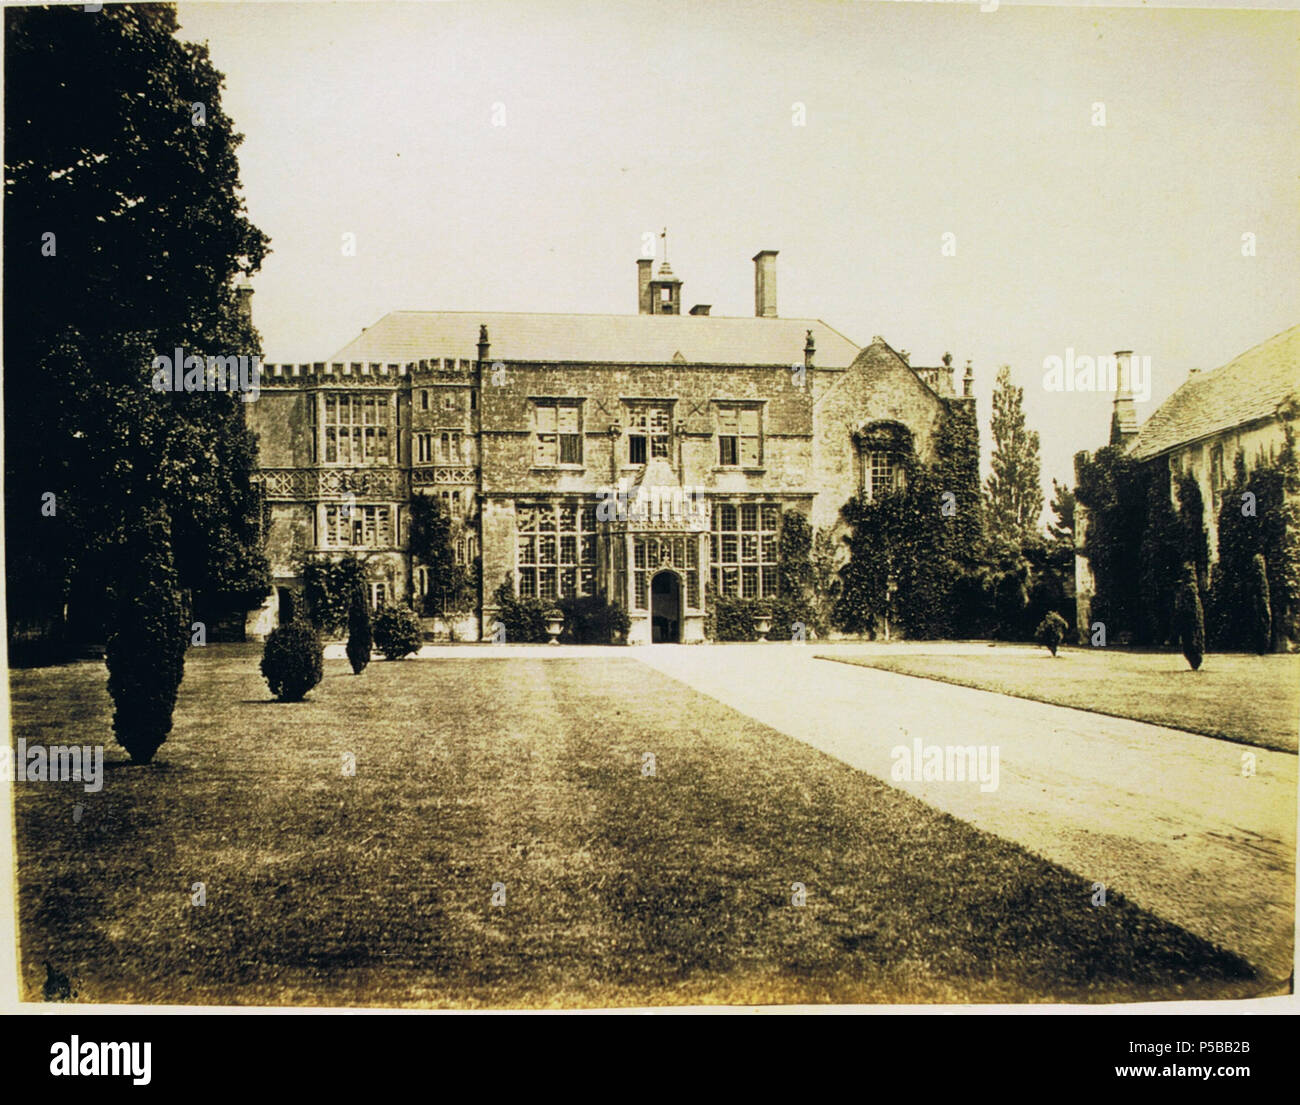 N/A. English: Brympton d'Evercy (also known as Brympton House), a manor house near Yeovil in the county of Somerset, England. Front entrance. circa 1860. Anon. But uploaded by R. de Salis, meRodolph2 (talk) 00:33, 24 July 2014 (UTC) 244 Brympton entrance front 1860 Stock Photo